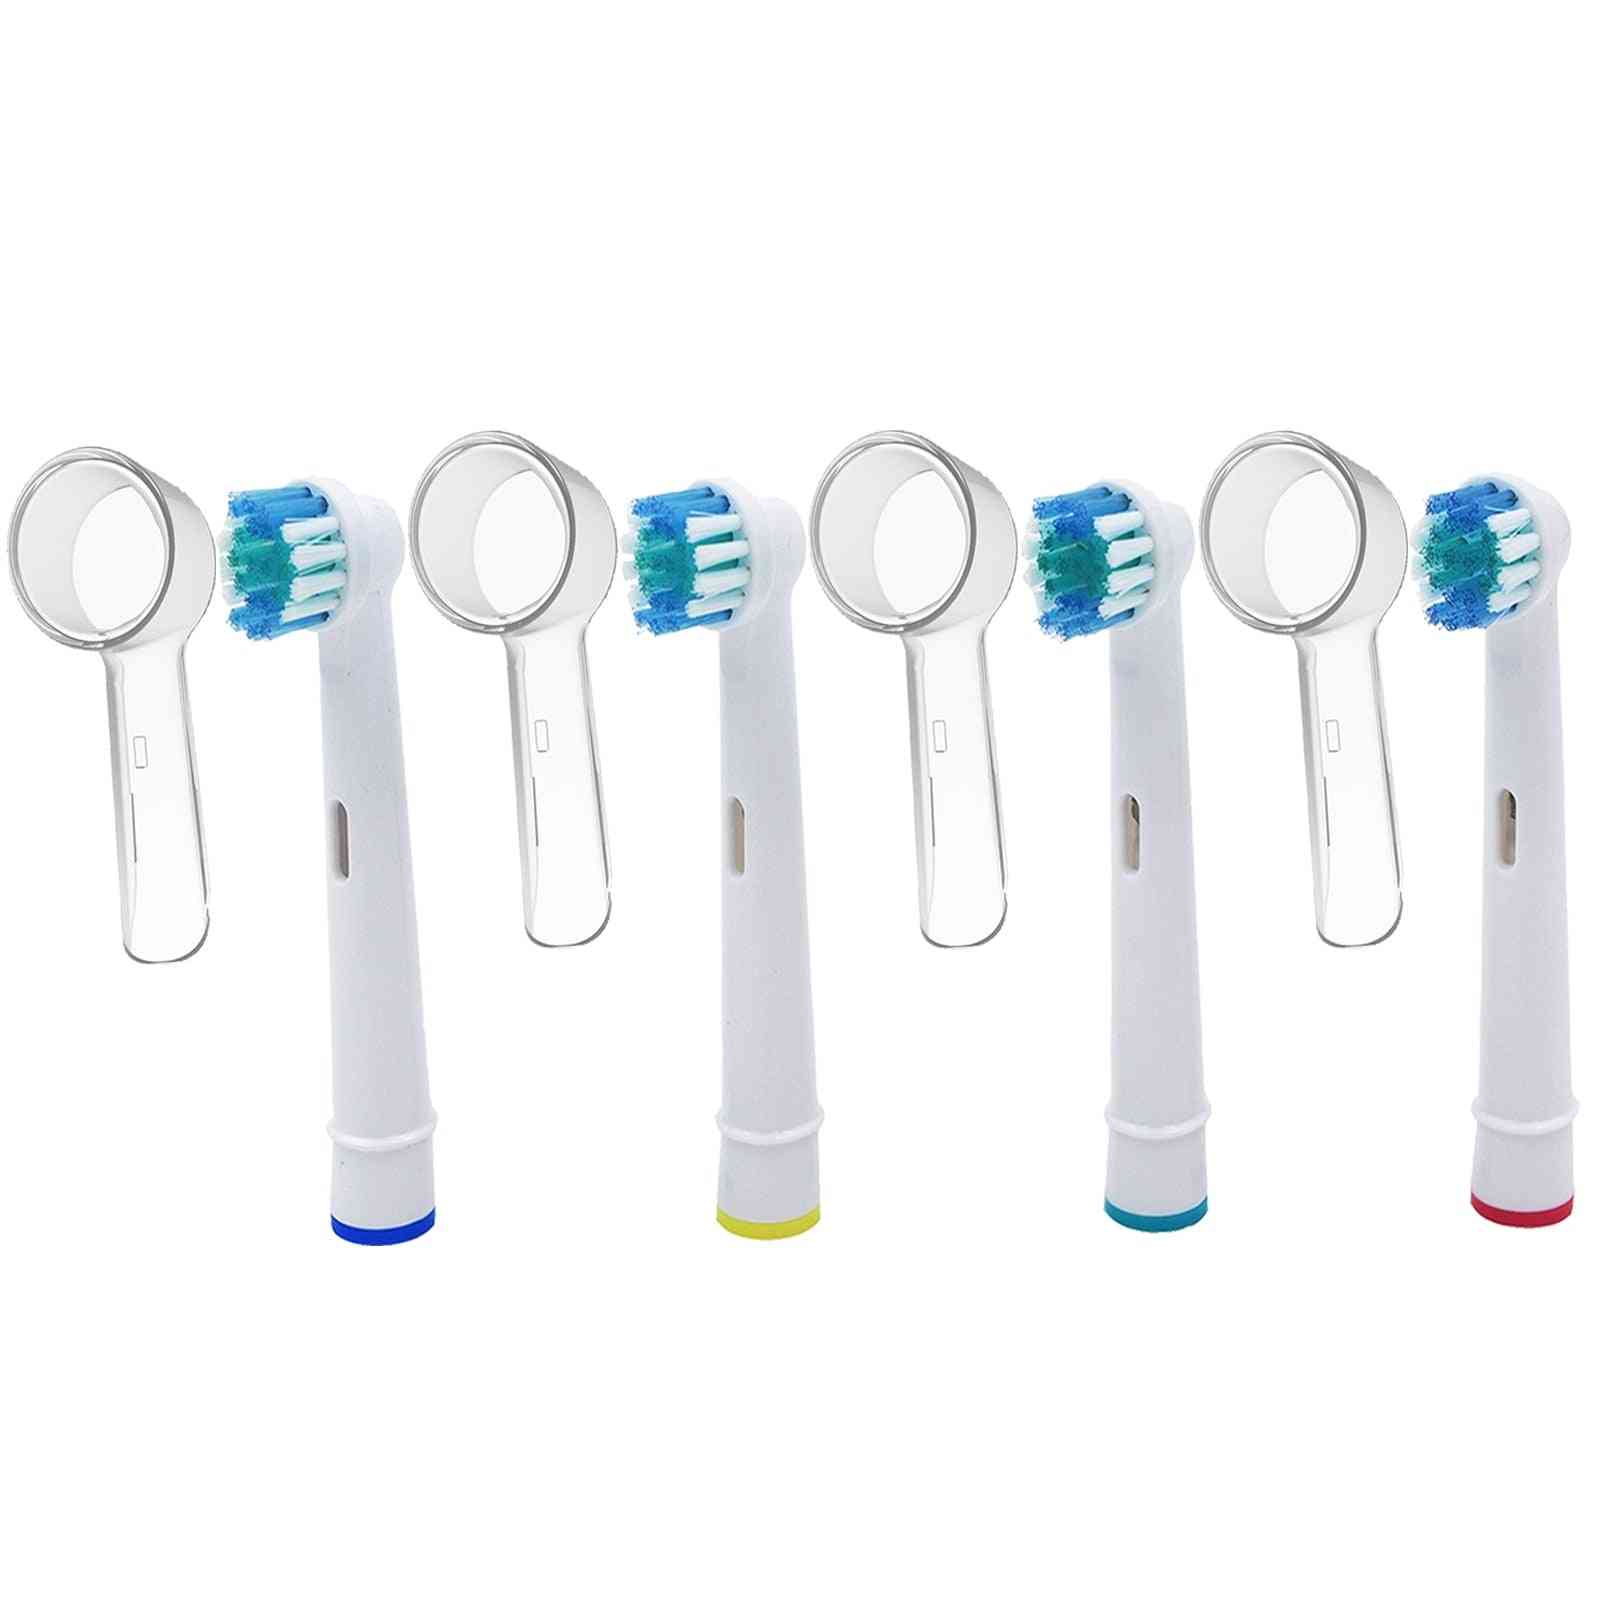 Replacement Brush Heads For Braun Oral